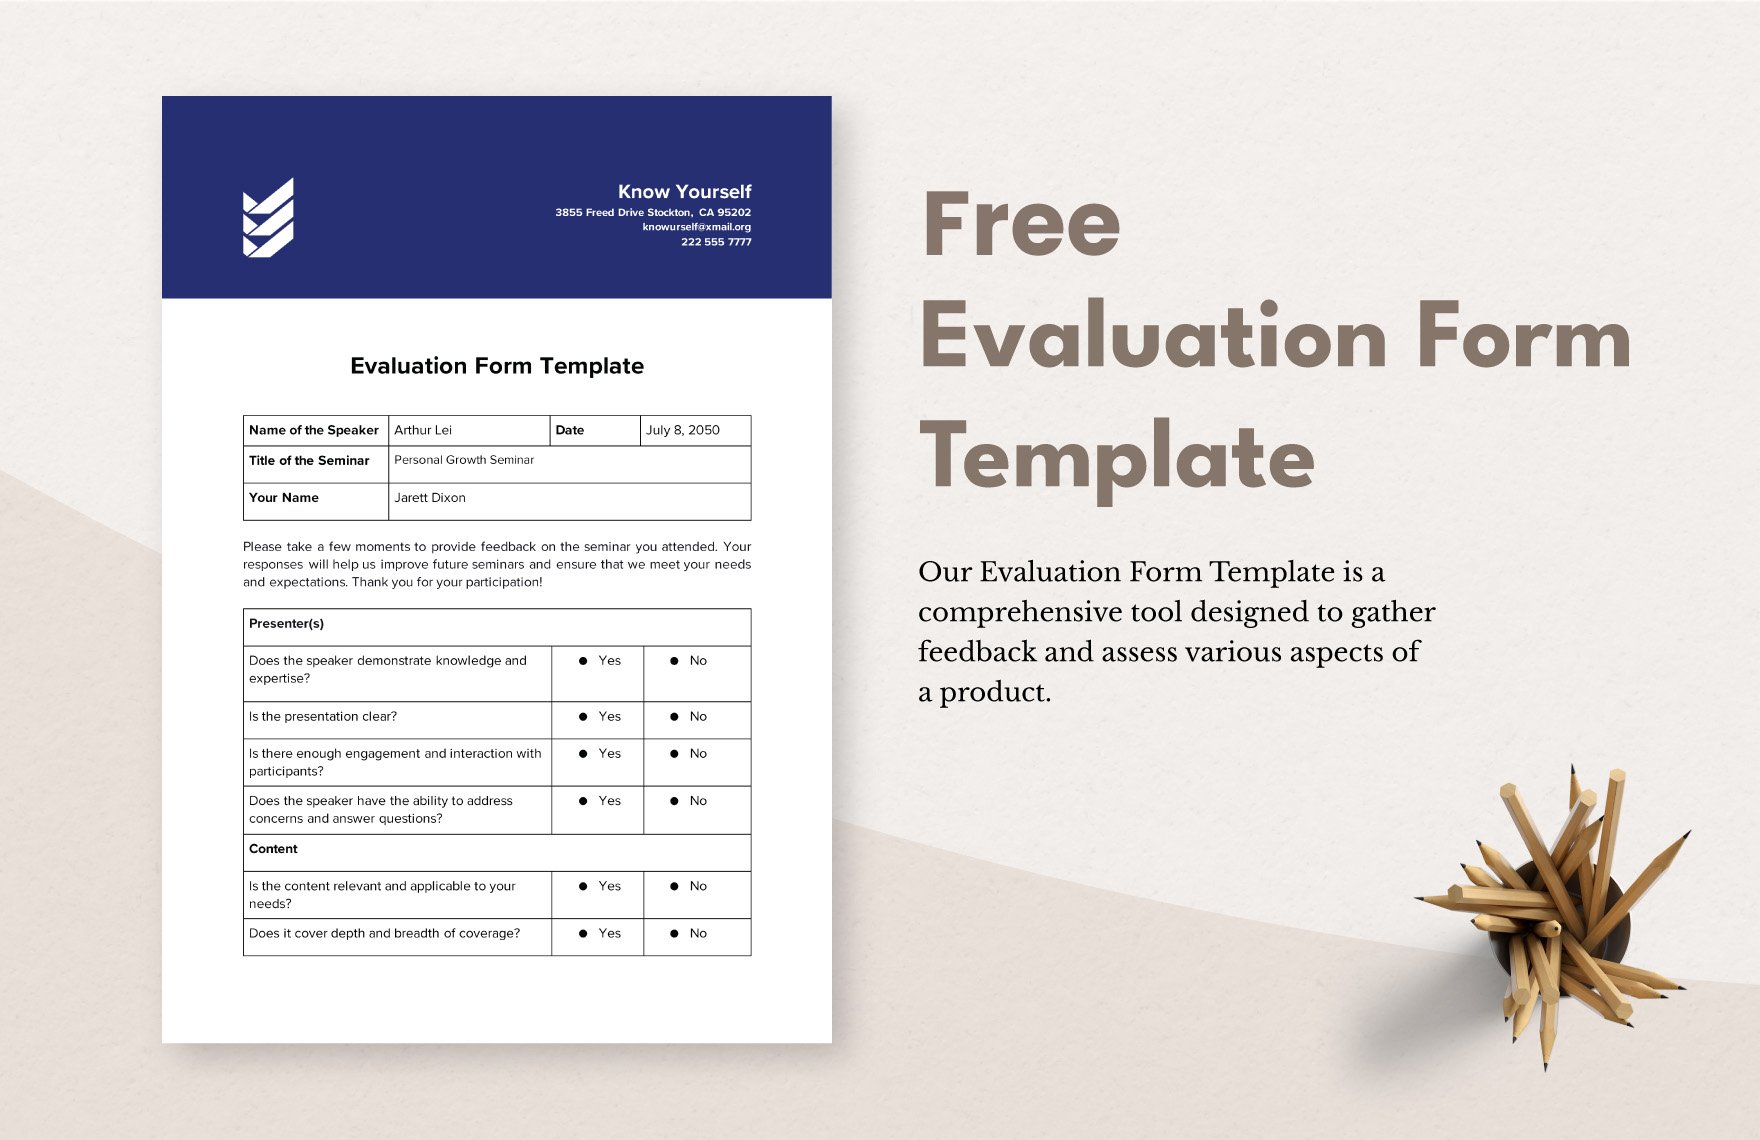 Free Evaluation Form Template in Word, Google Docs, PDF